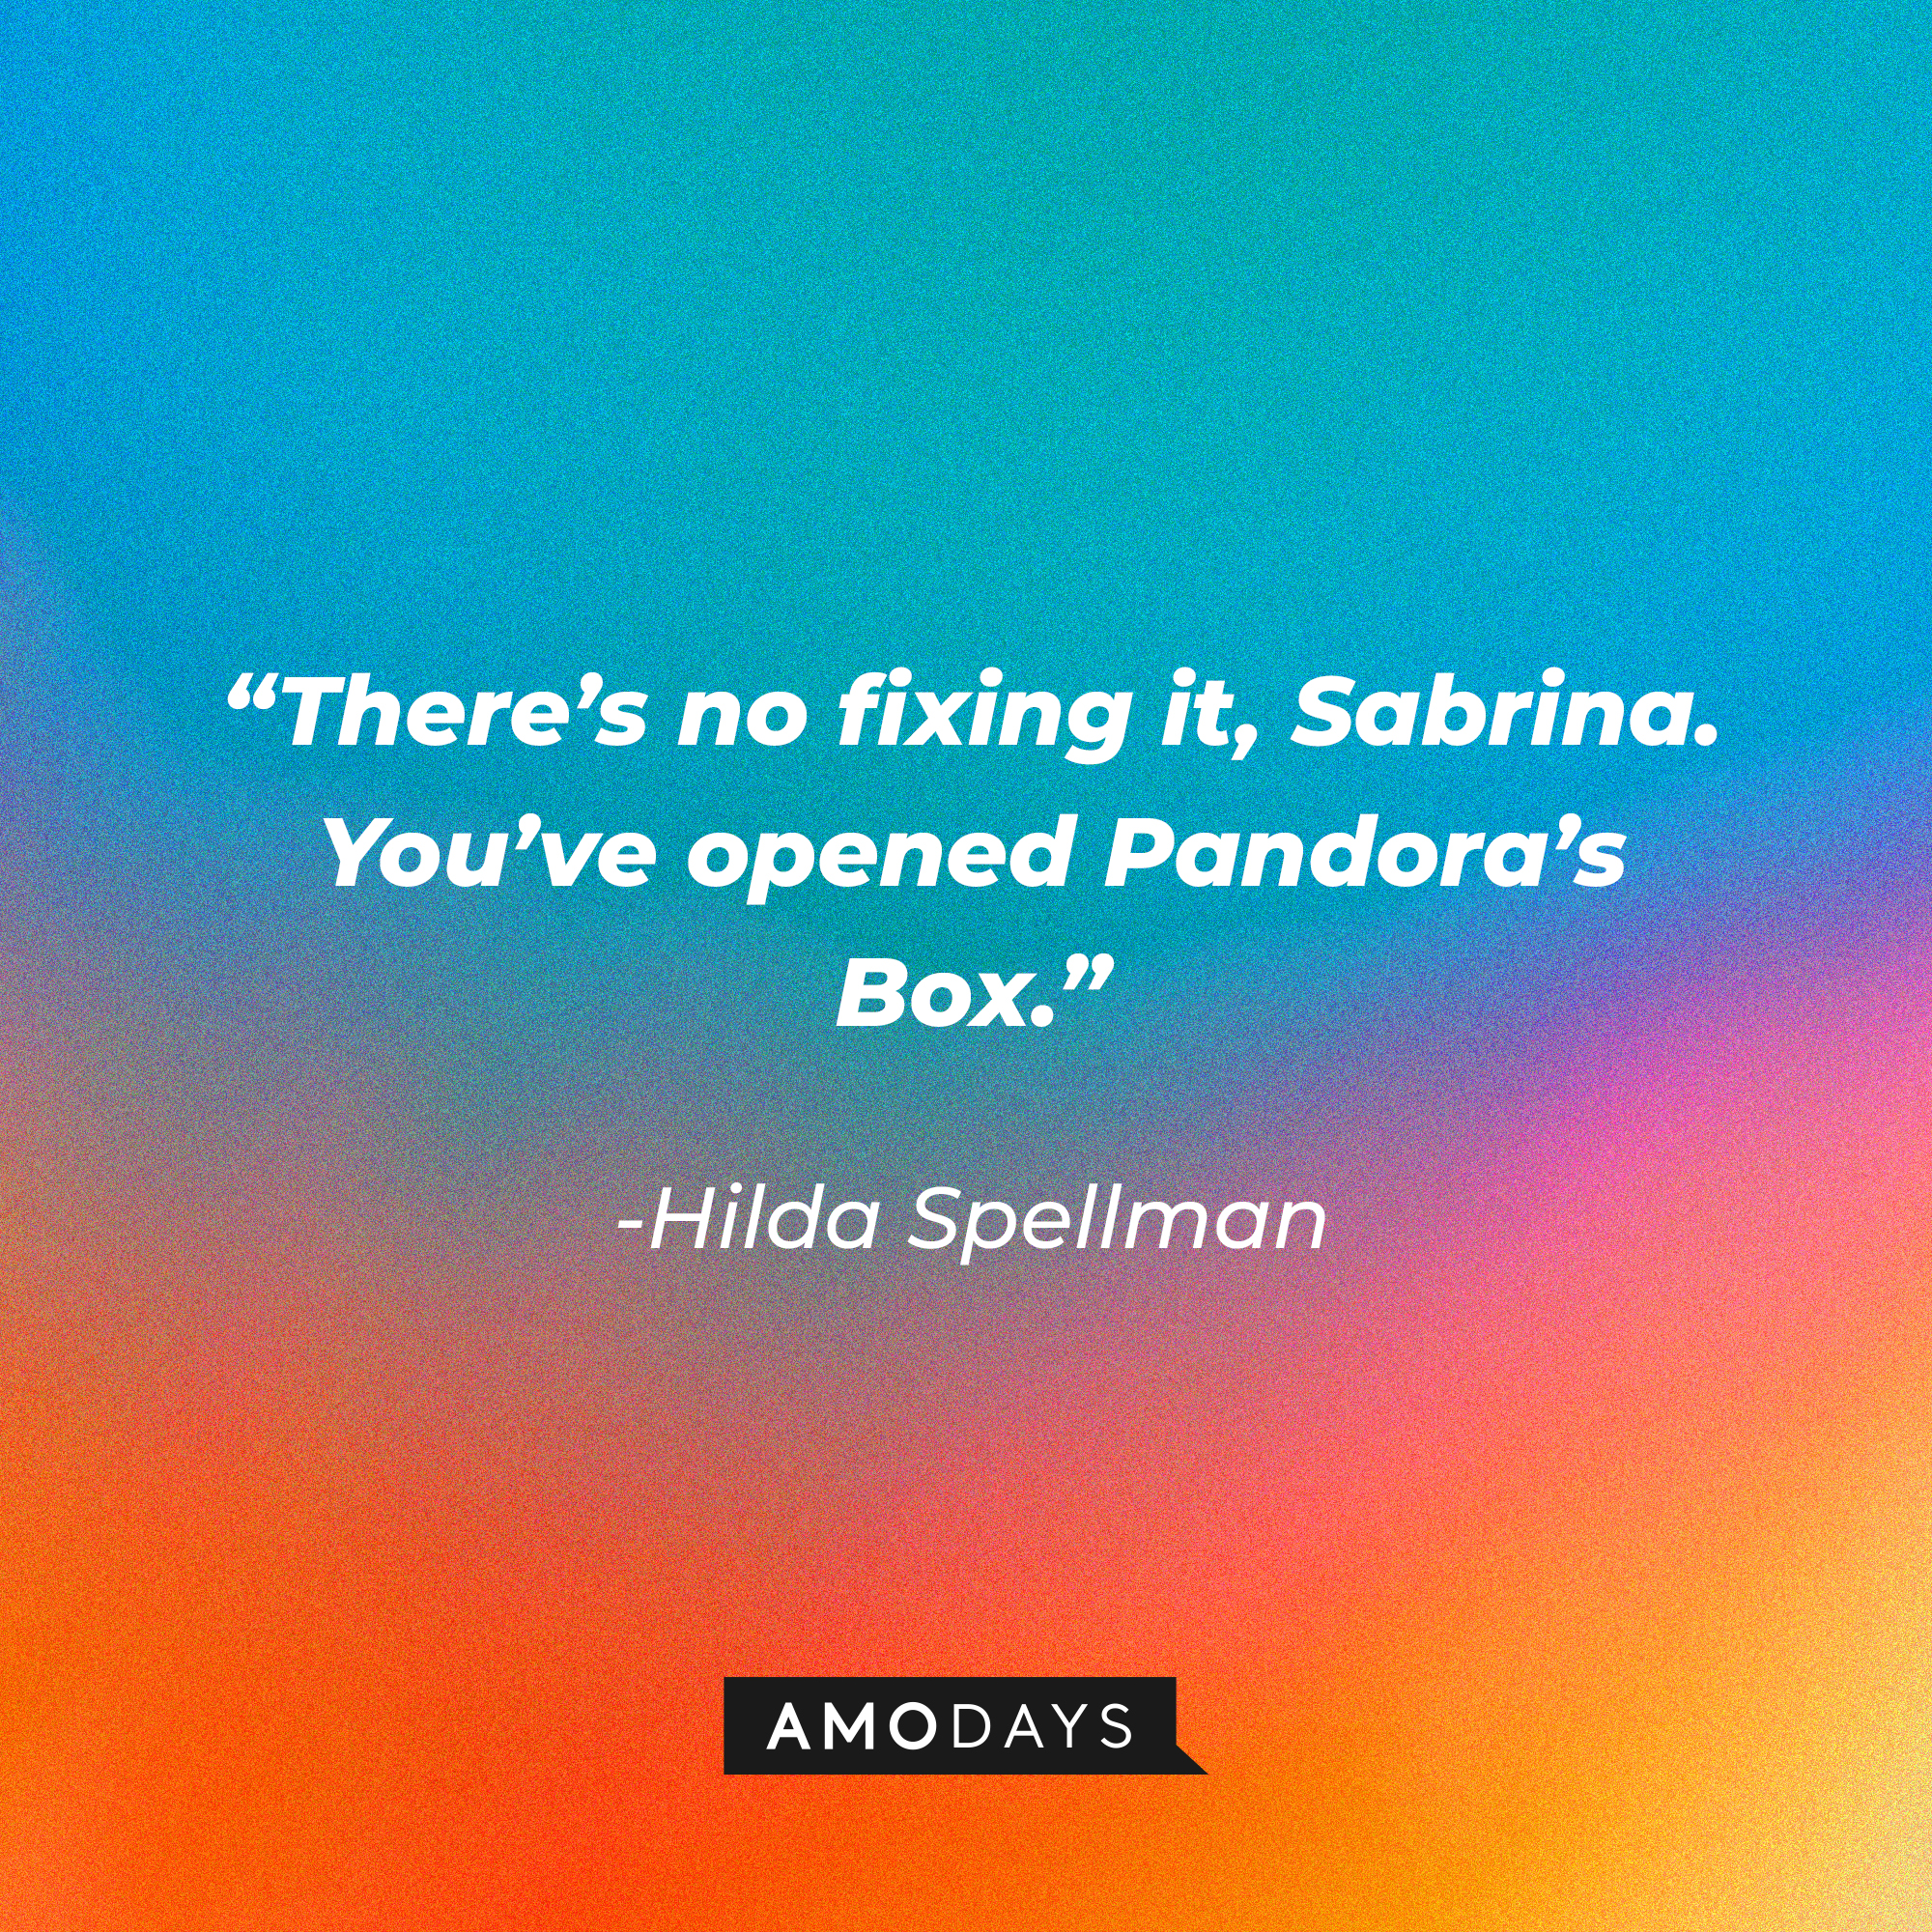 Hilda Spellman's quote: “There’s no fixing it, Sabrina. You’ve opened Pandora’s Box.” | Source: Amodays